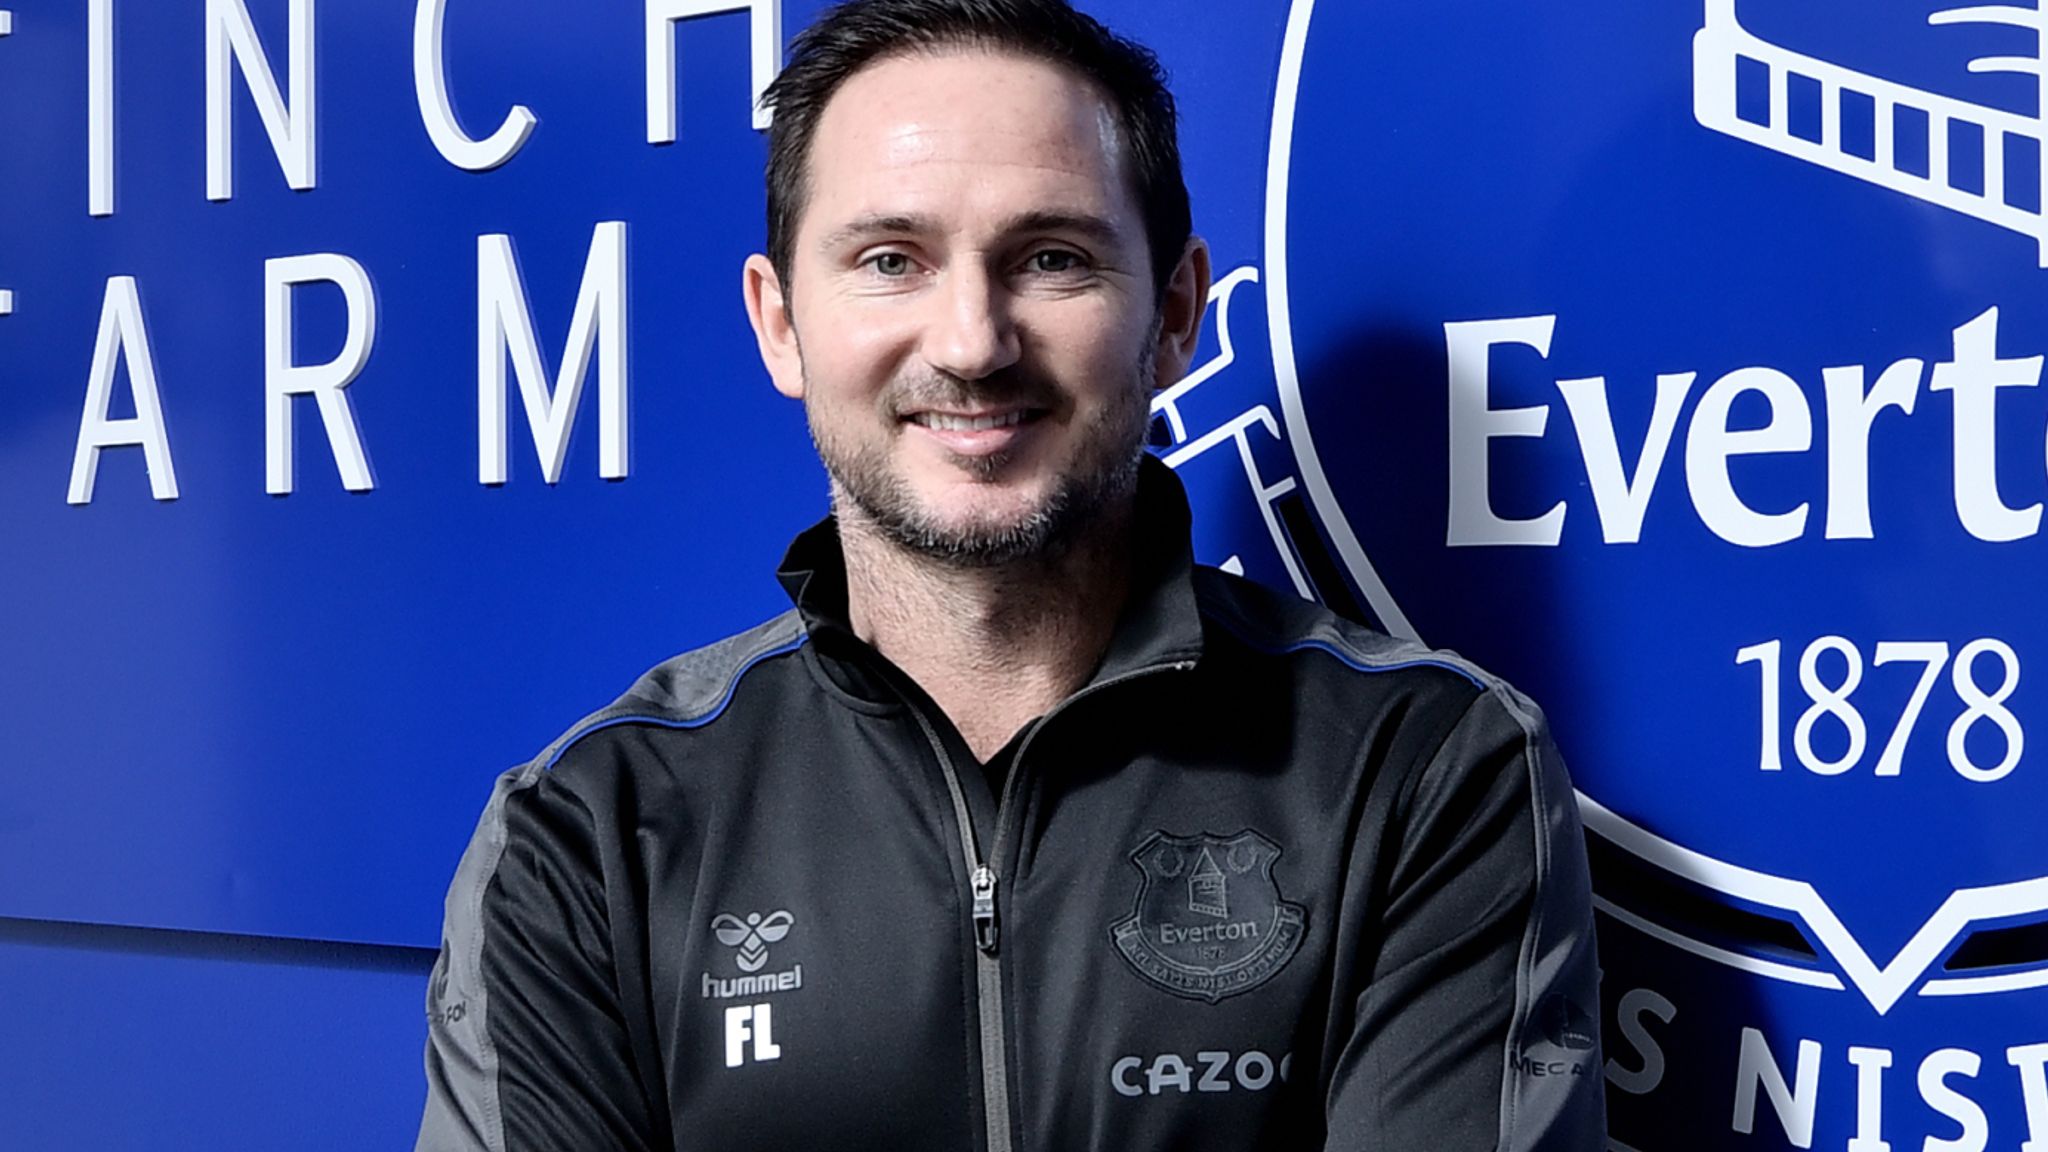 Frank Lampard: Everton's new manager confident he can harness 'huge talent'  in his squad | Football News | Sky Sports